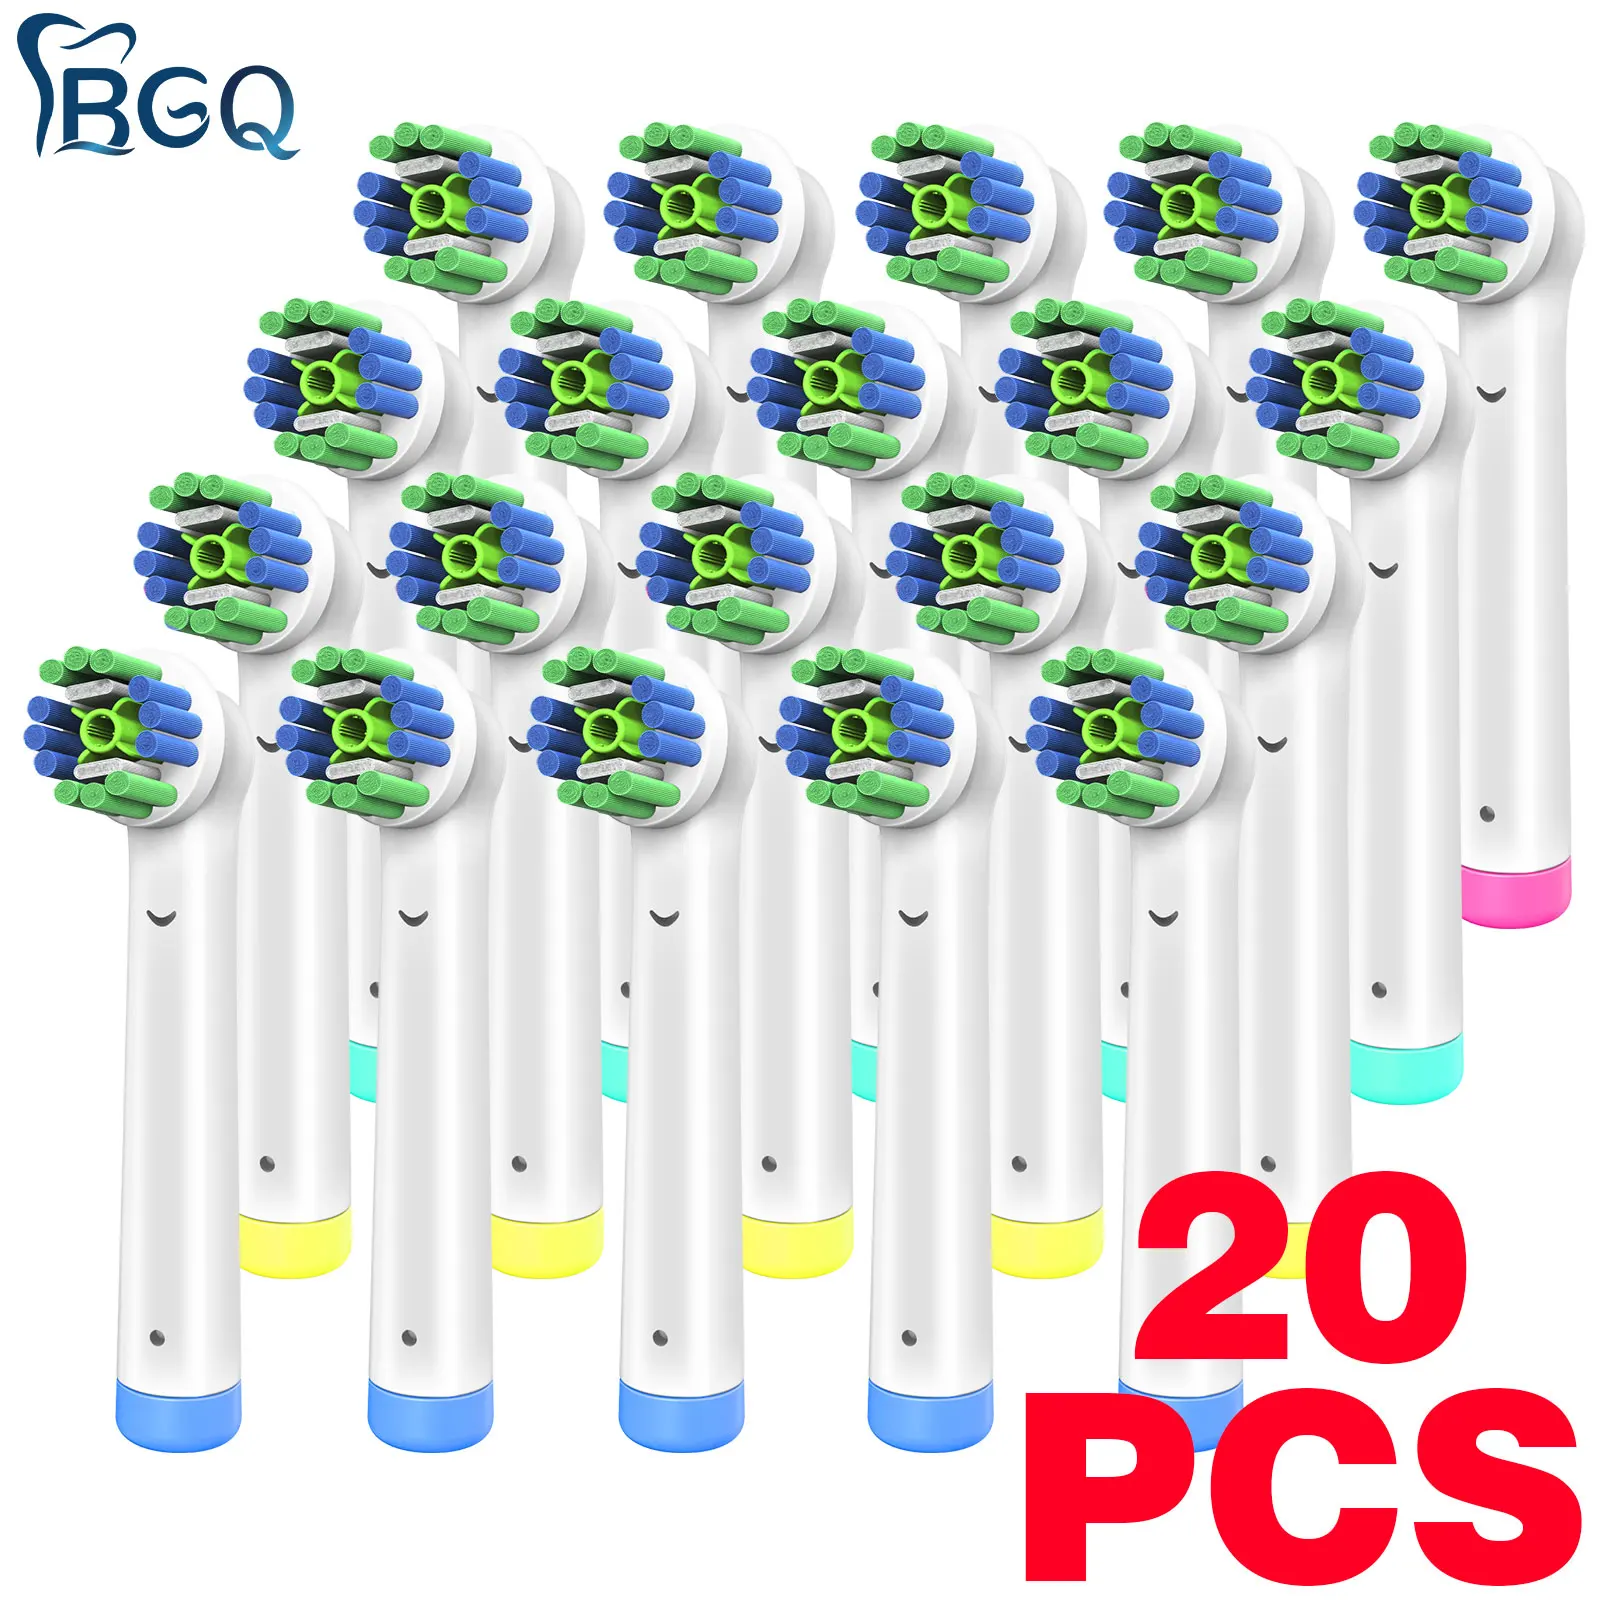 

20pcs Replacement Toothbrush Heads 3D White 7x Whitening Gum Care for Oralb Nozzles Refill Oral B Attachments All Models